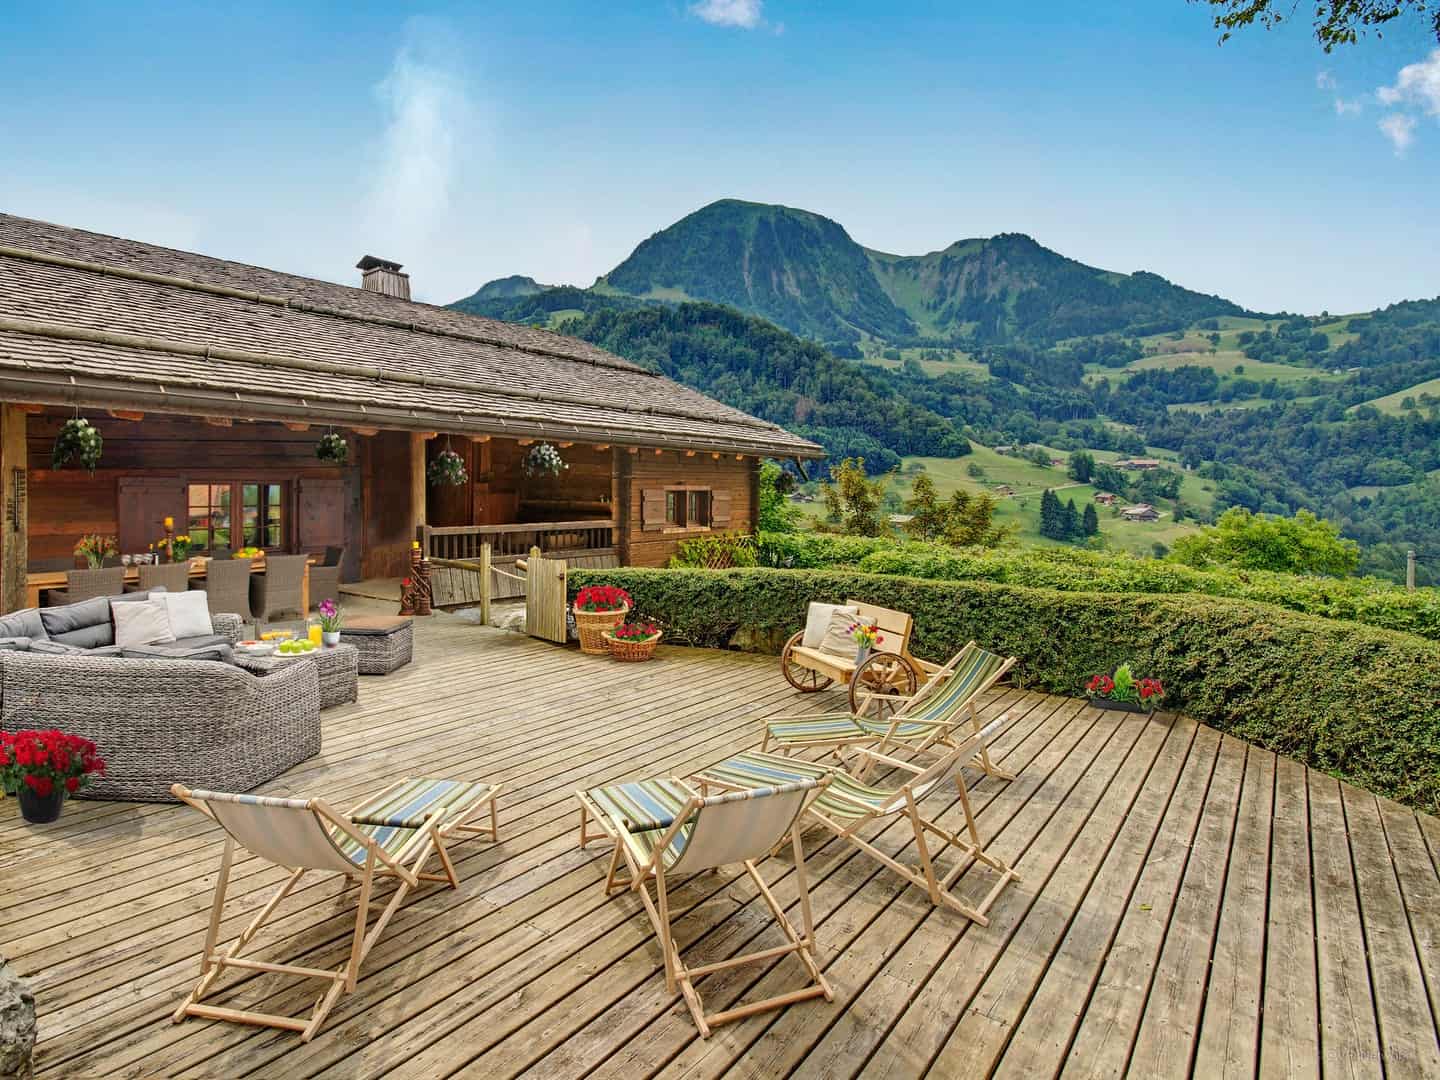 Sunbathe in the deckchairs, the lounge space or dine at the sheltered dining table at La Vieille Ferme in Manigod. 